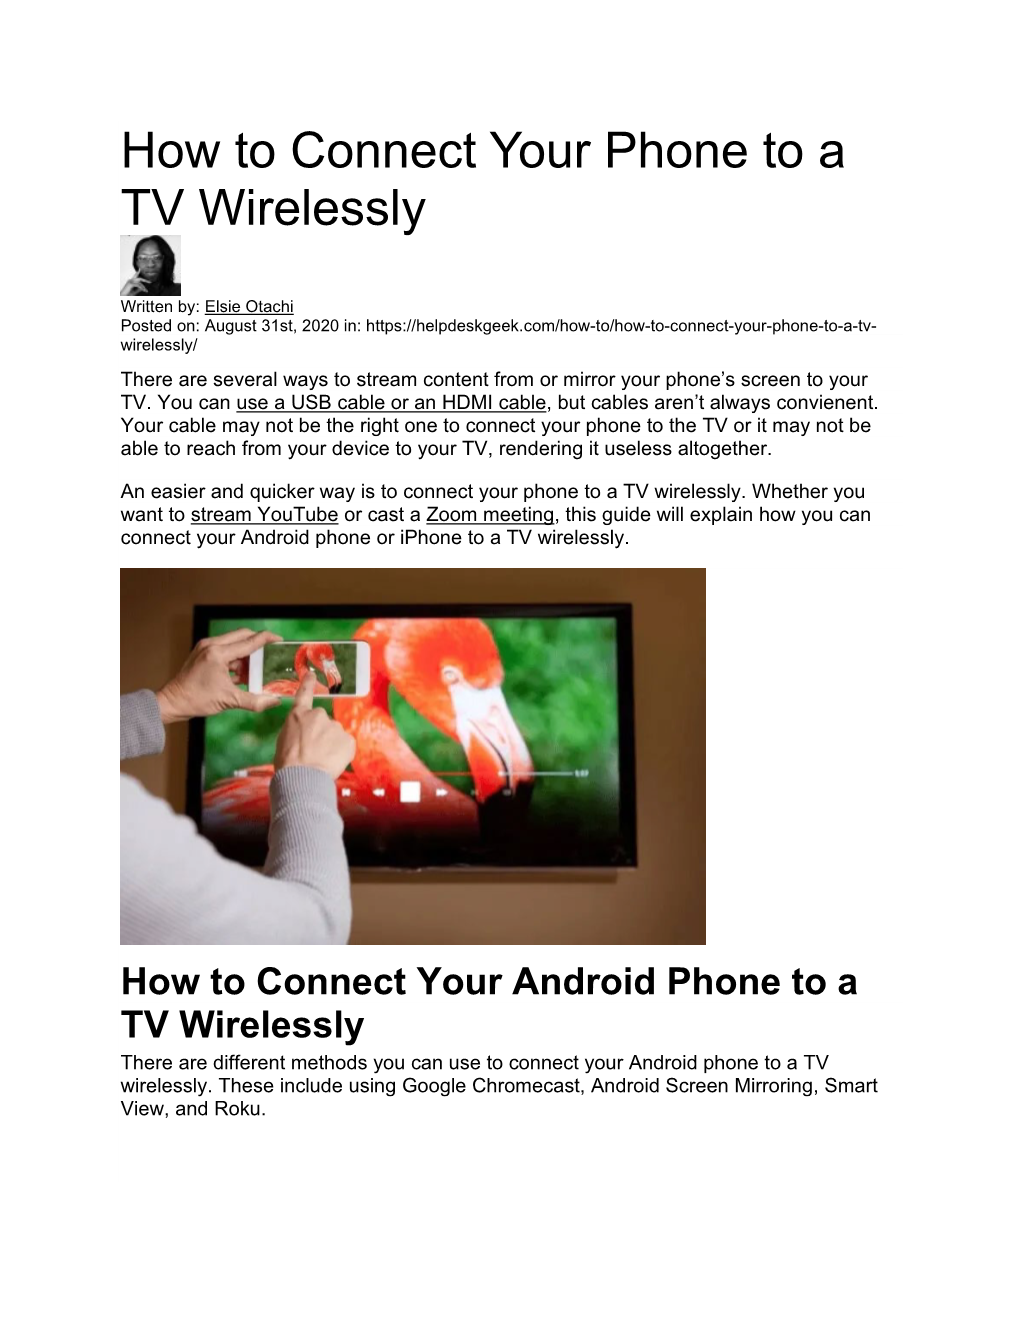 How to Connect Your Phone to a TV Wirelessly